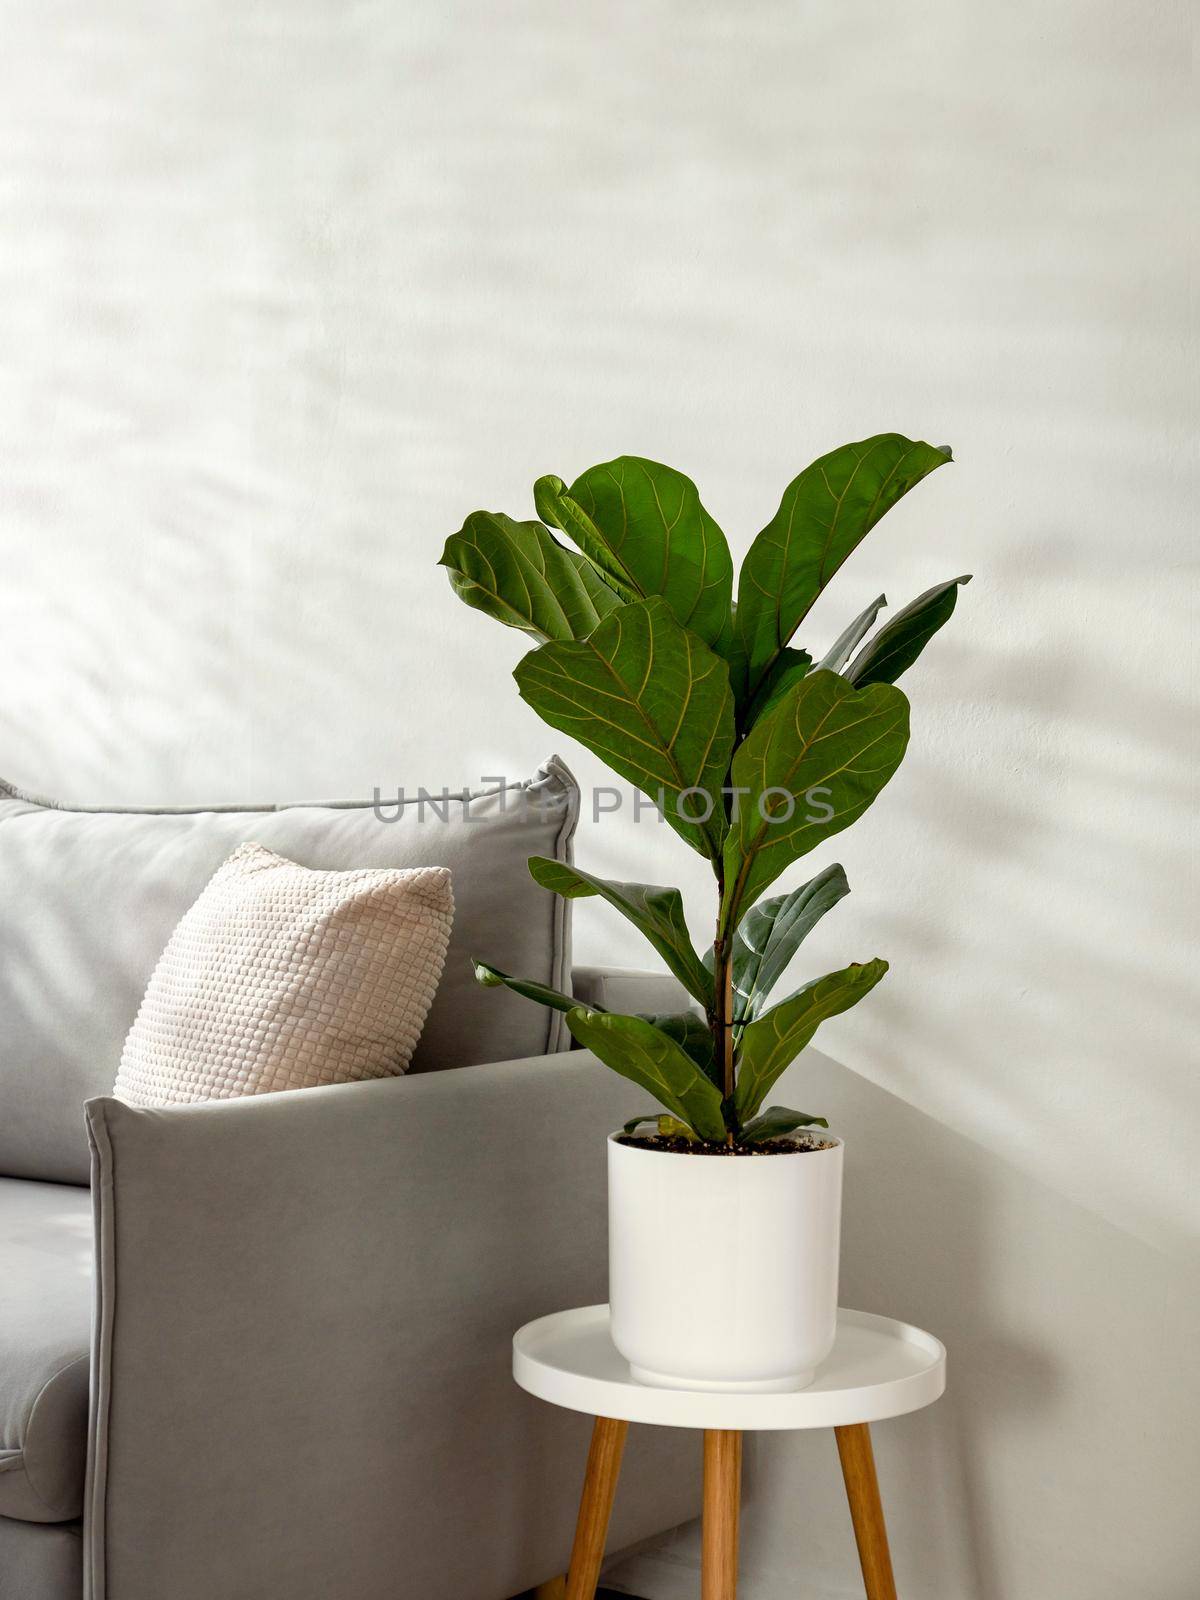 Ficus lyrata or fiddle leaf fig in living room interior. Room decoration with plant. Scandinavian fiddle peaf tree indoor plant in circle white pot at home. Potted ficus Lyrata or fiddle leaf fig tree